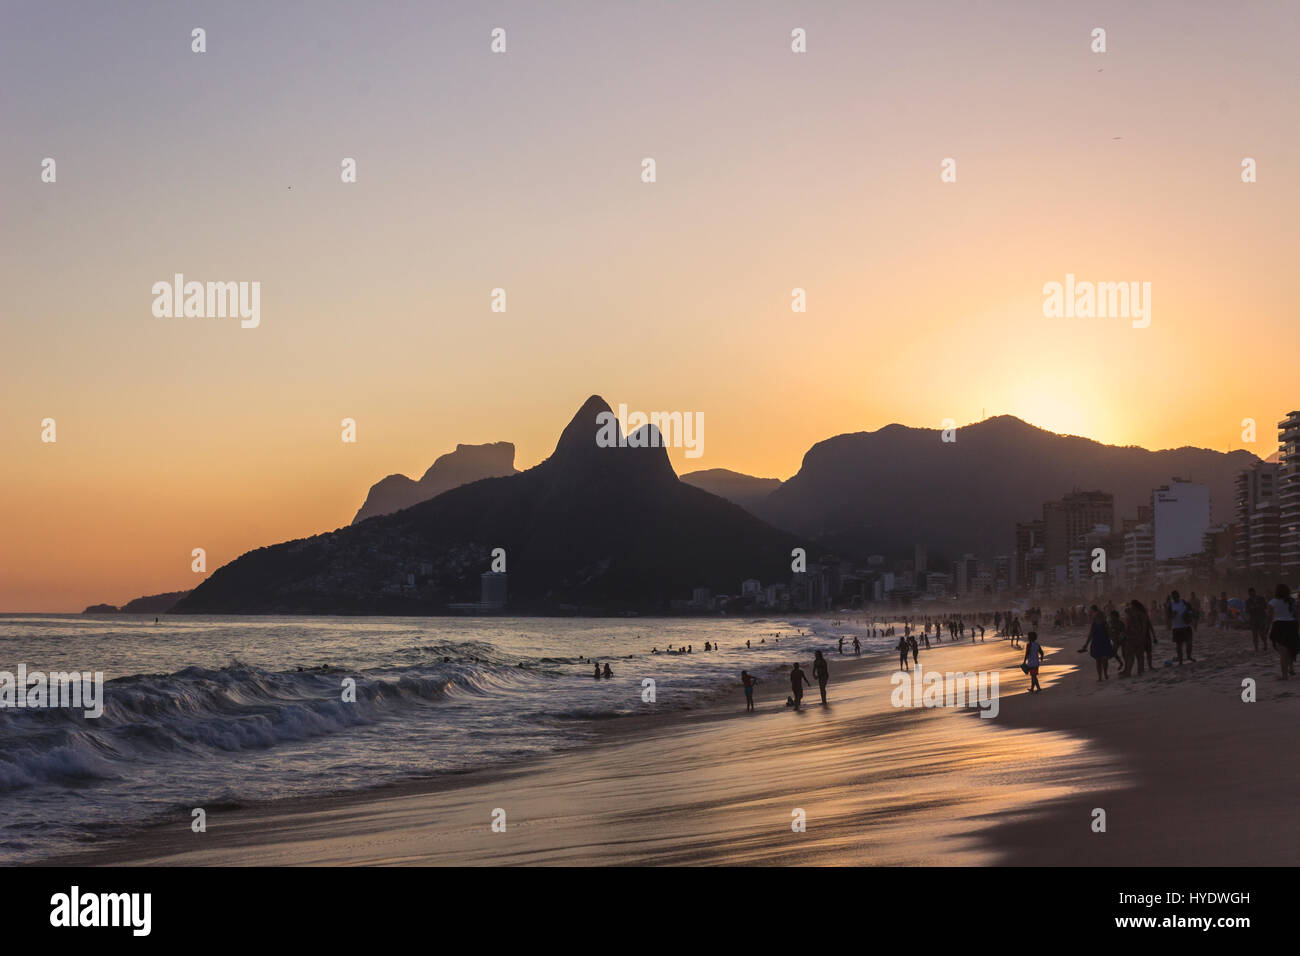 Sunset view of Ipanema beach with Dois Irmaos mountains on the background Stock Photo